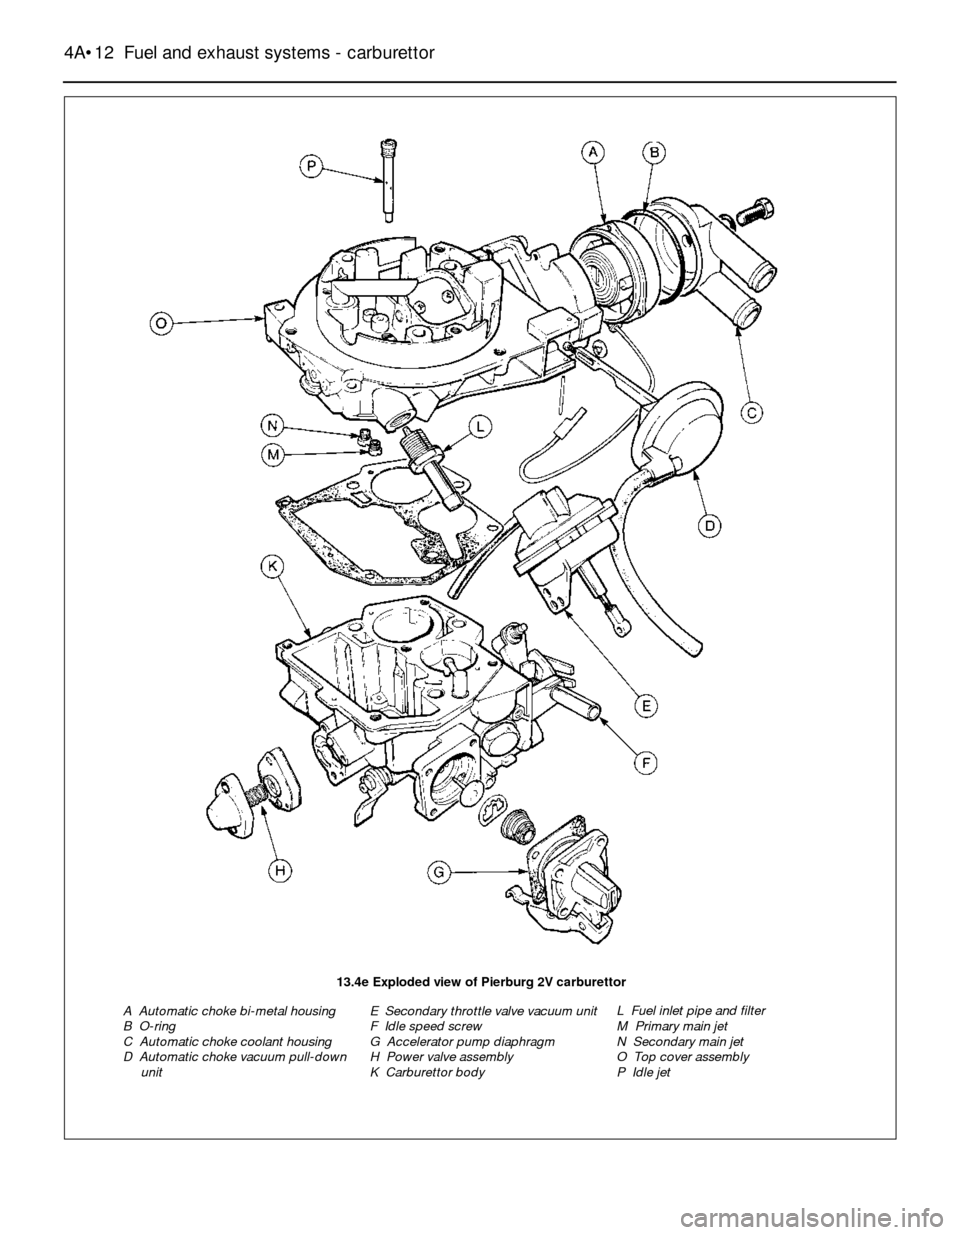 FORD SIERRA 1985 1.G Fuel And Exhaust Systems Carburettor User Guide 4A•12Fuel and exhaust systems - carburettor
13.4e Exploded view of Pierburg 2V carburettor
A  Automatic choke bi-metal housing
B  O-ring
C  Automatic choke coolant housing
D  Automatic choke vacuum 